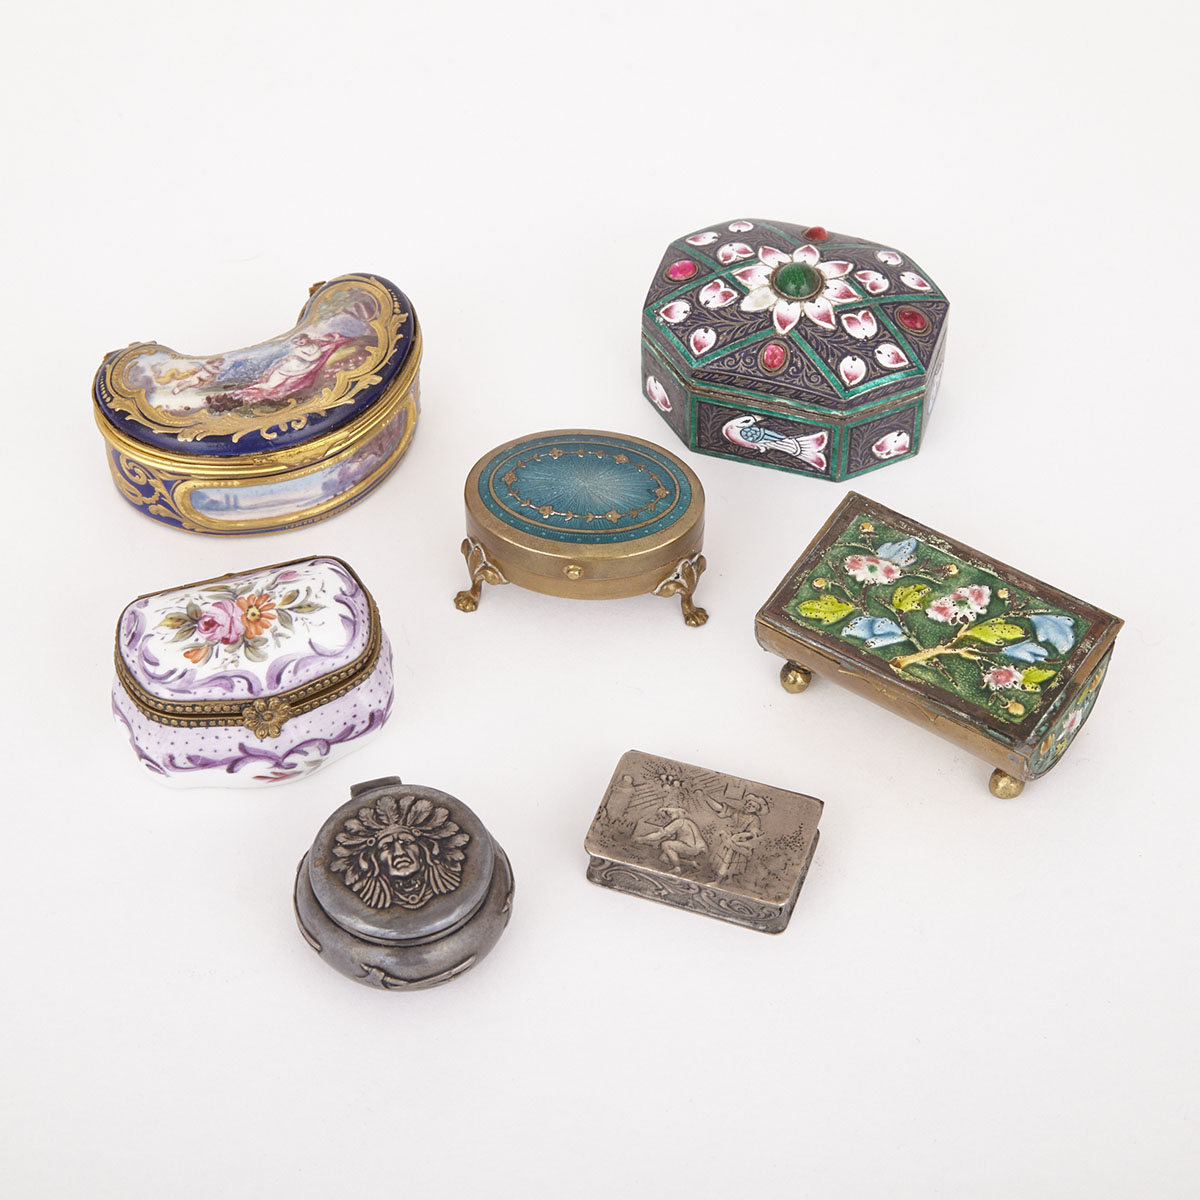 Group of Seven Silver, Enameled Metal and Porcelain Snuff Boxes, 20th century